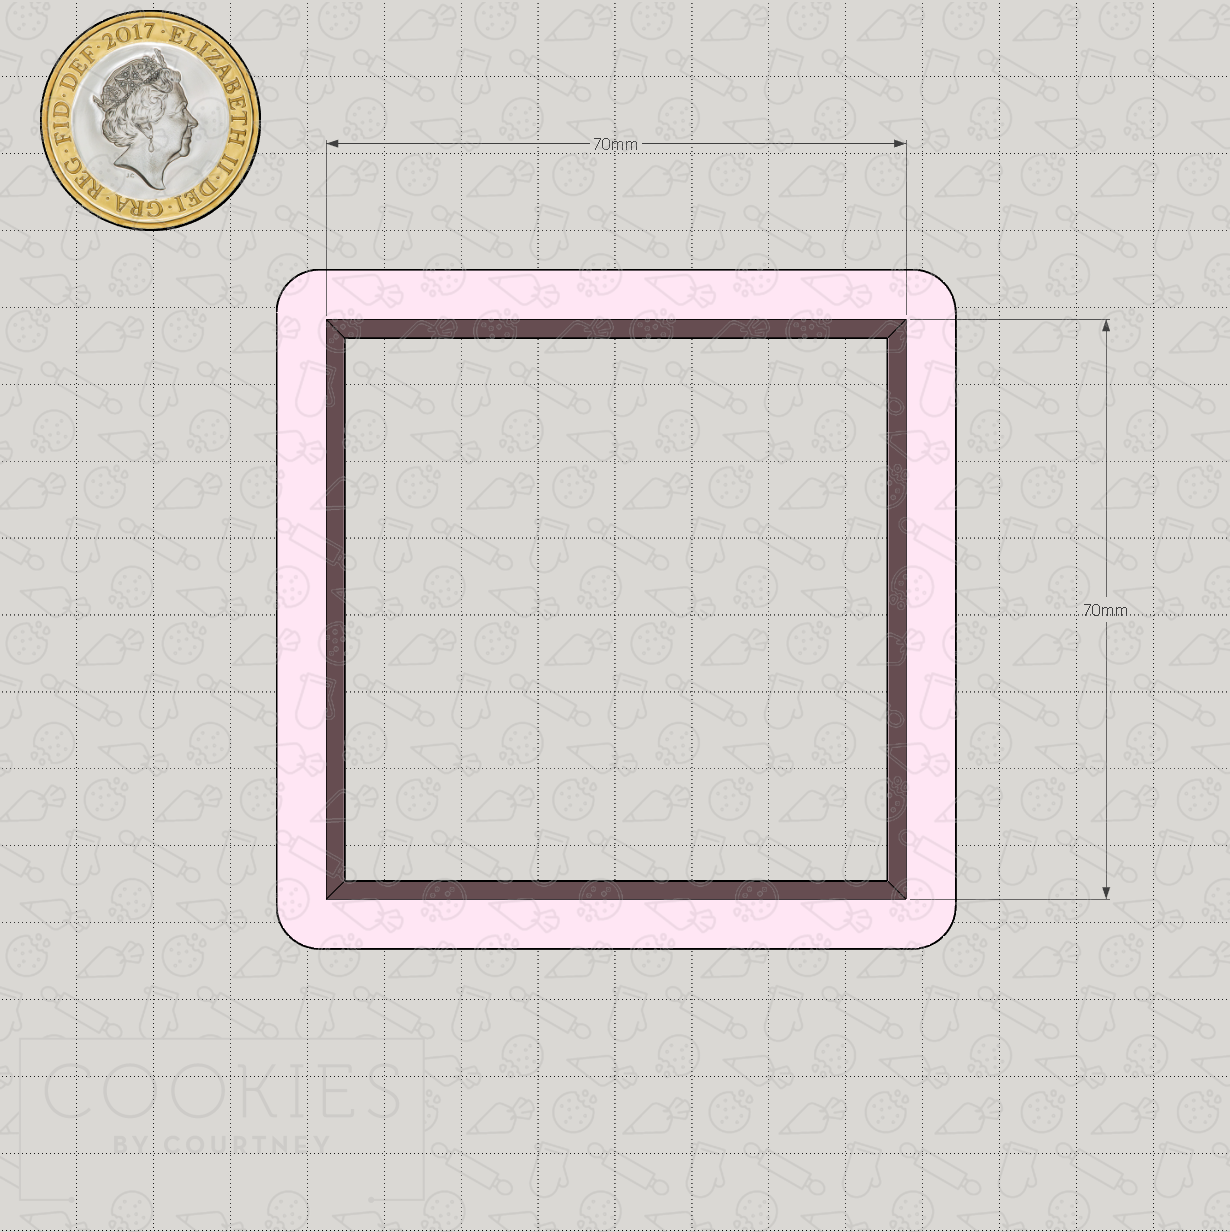 Basic Shapes - Square - Cookie Cutter